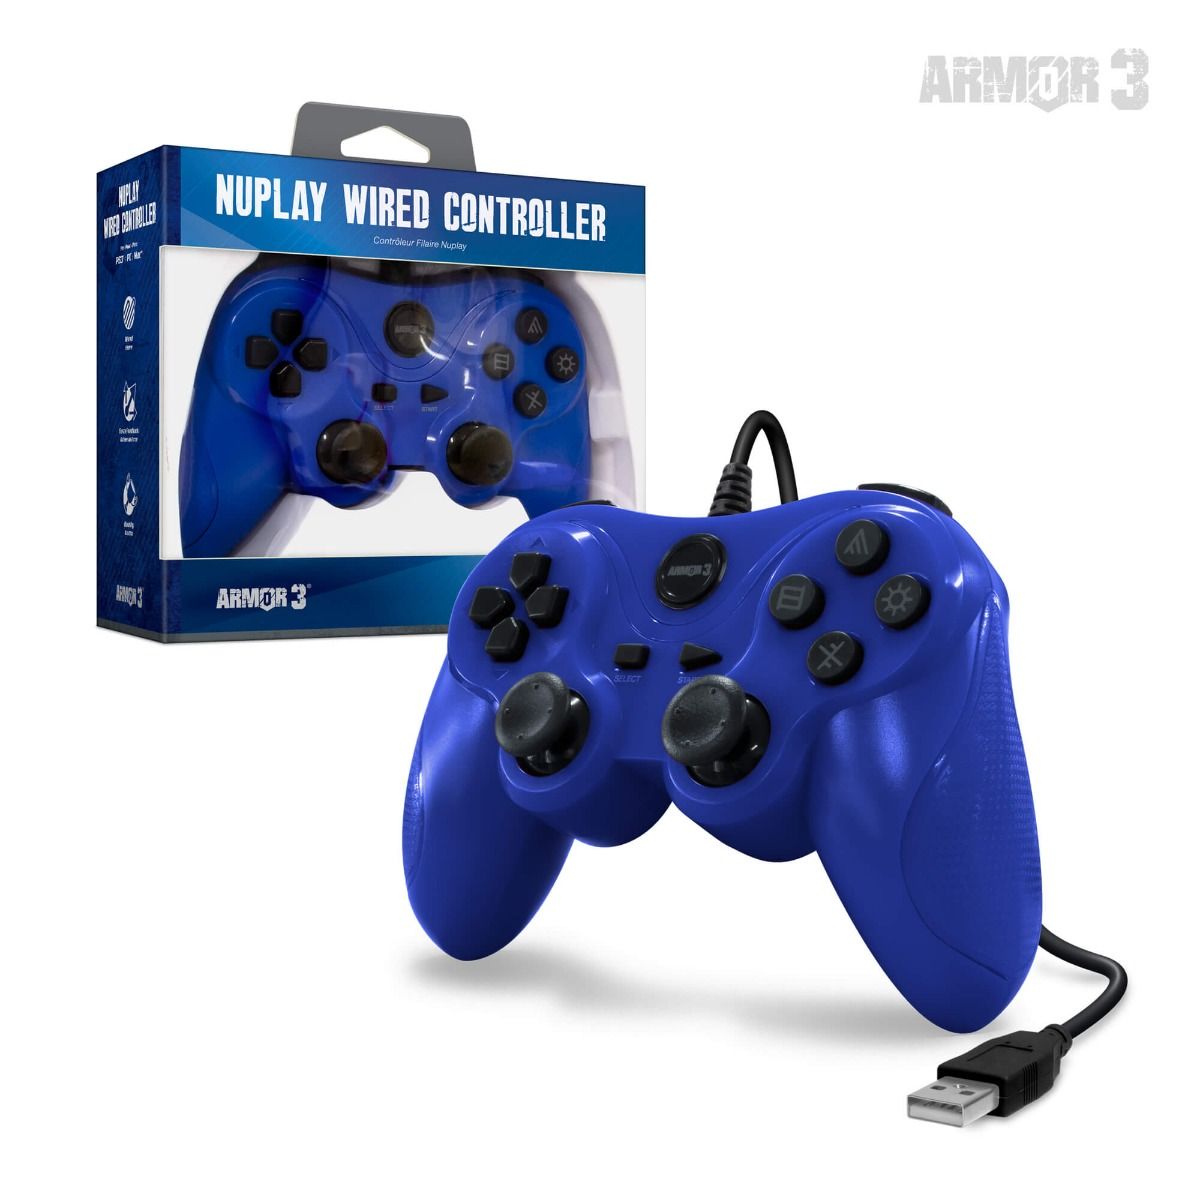 Ps3 - Armor3 NuPlay Wired Game Controller - Brand New